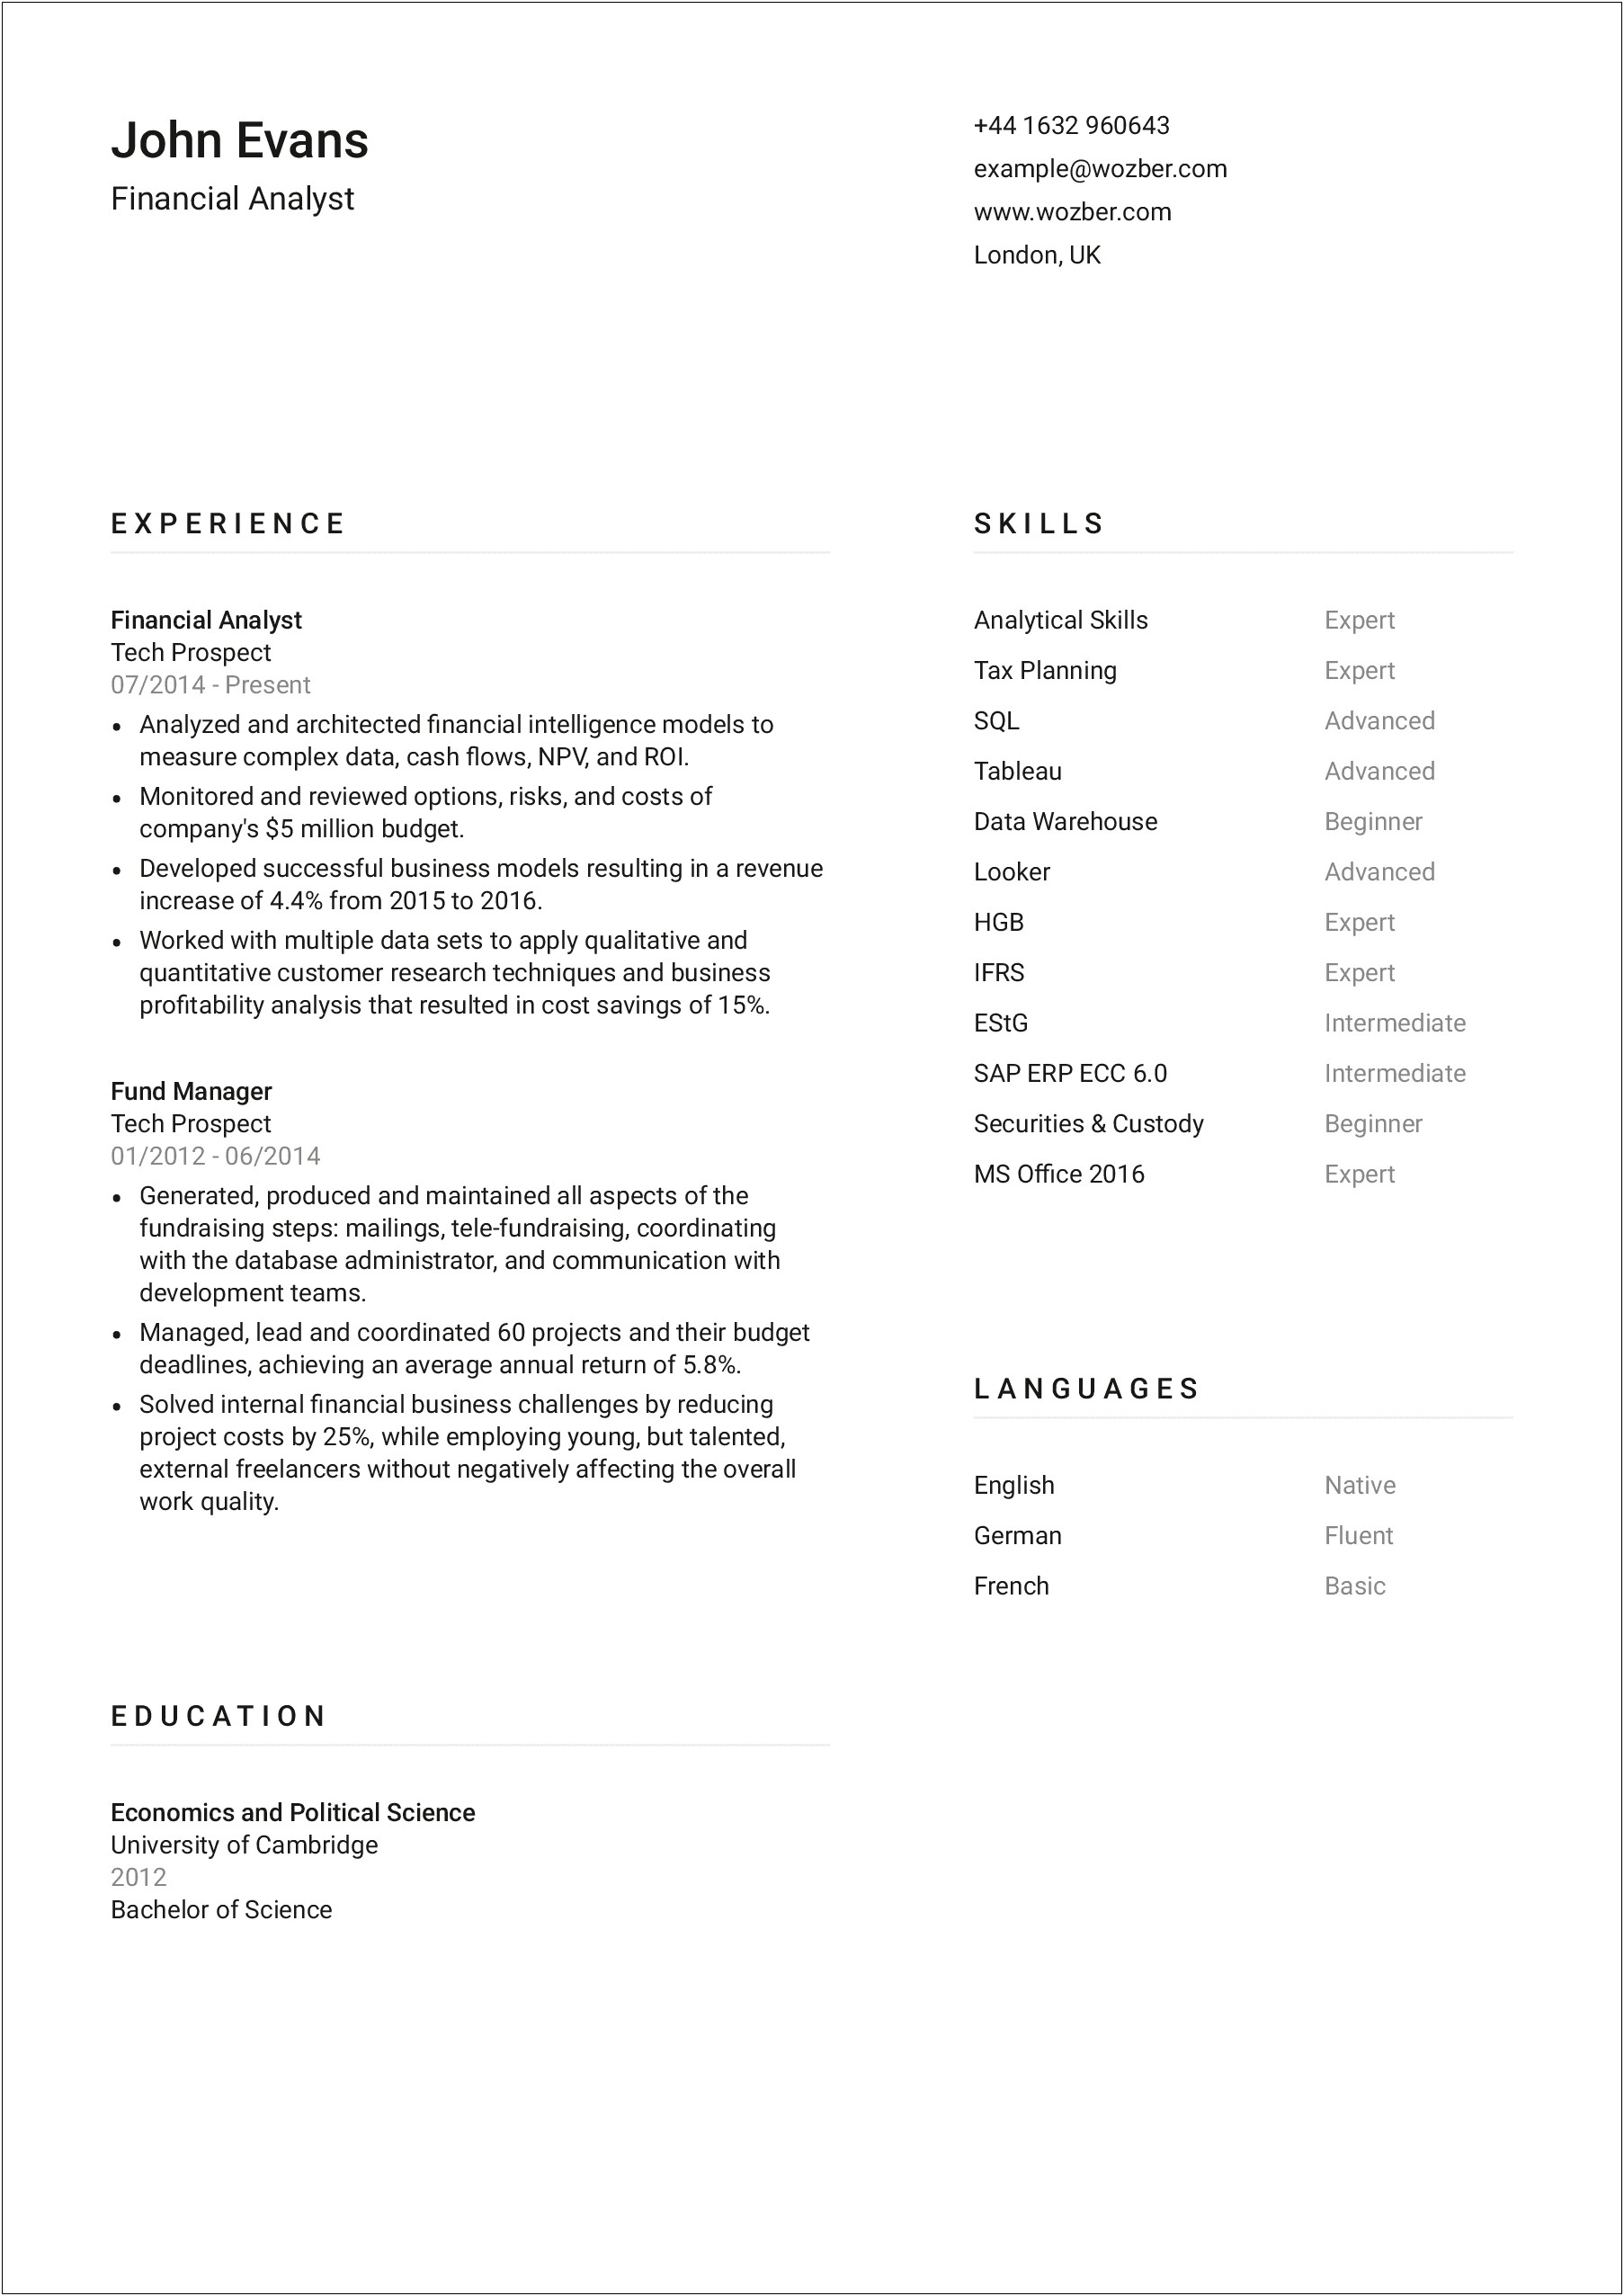 Resume Samples For Higher Education Positions